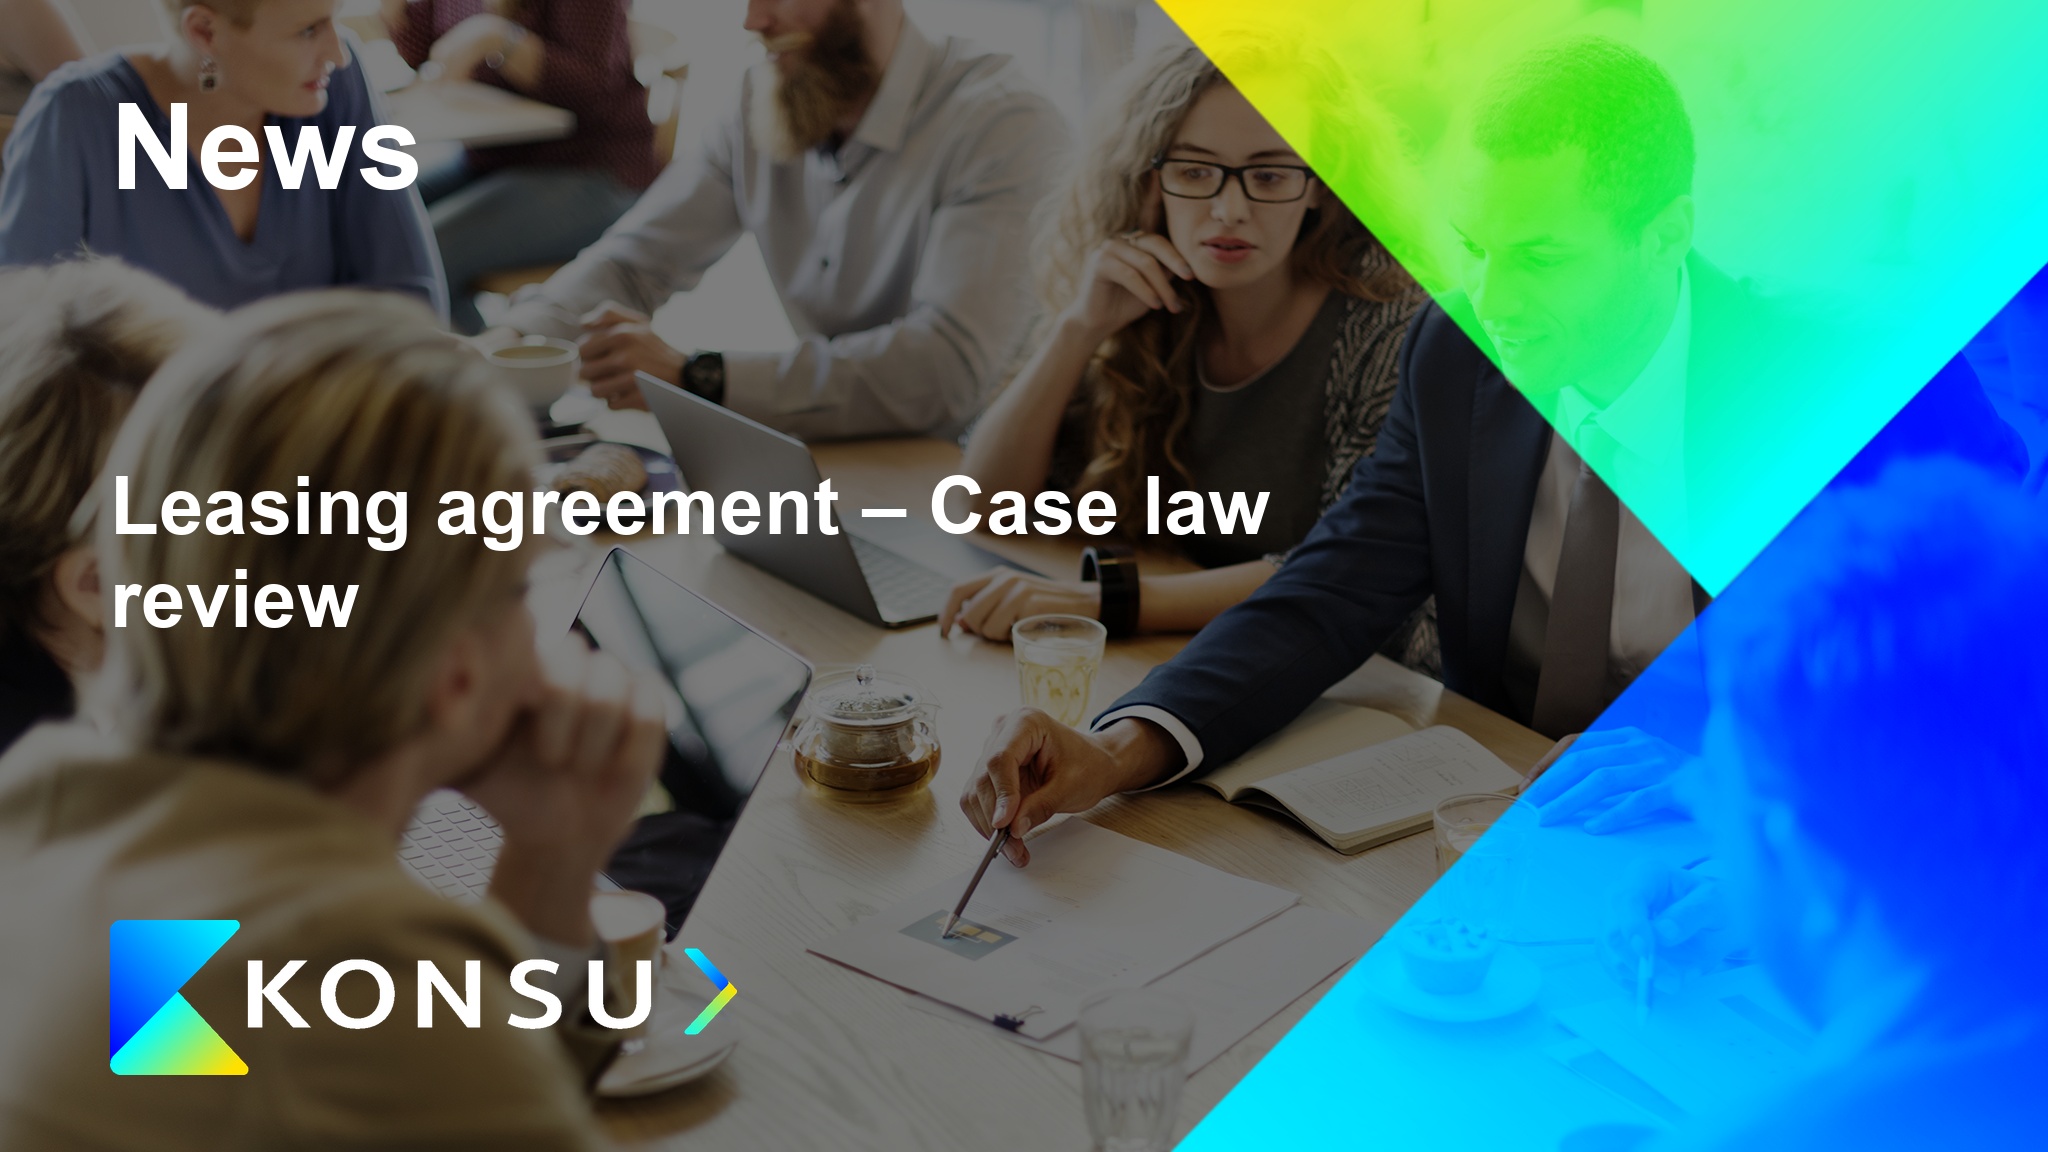 Leasing agreement case law review en konsu outsourcing consultin